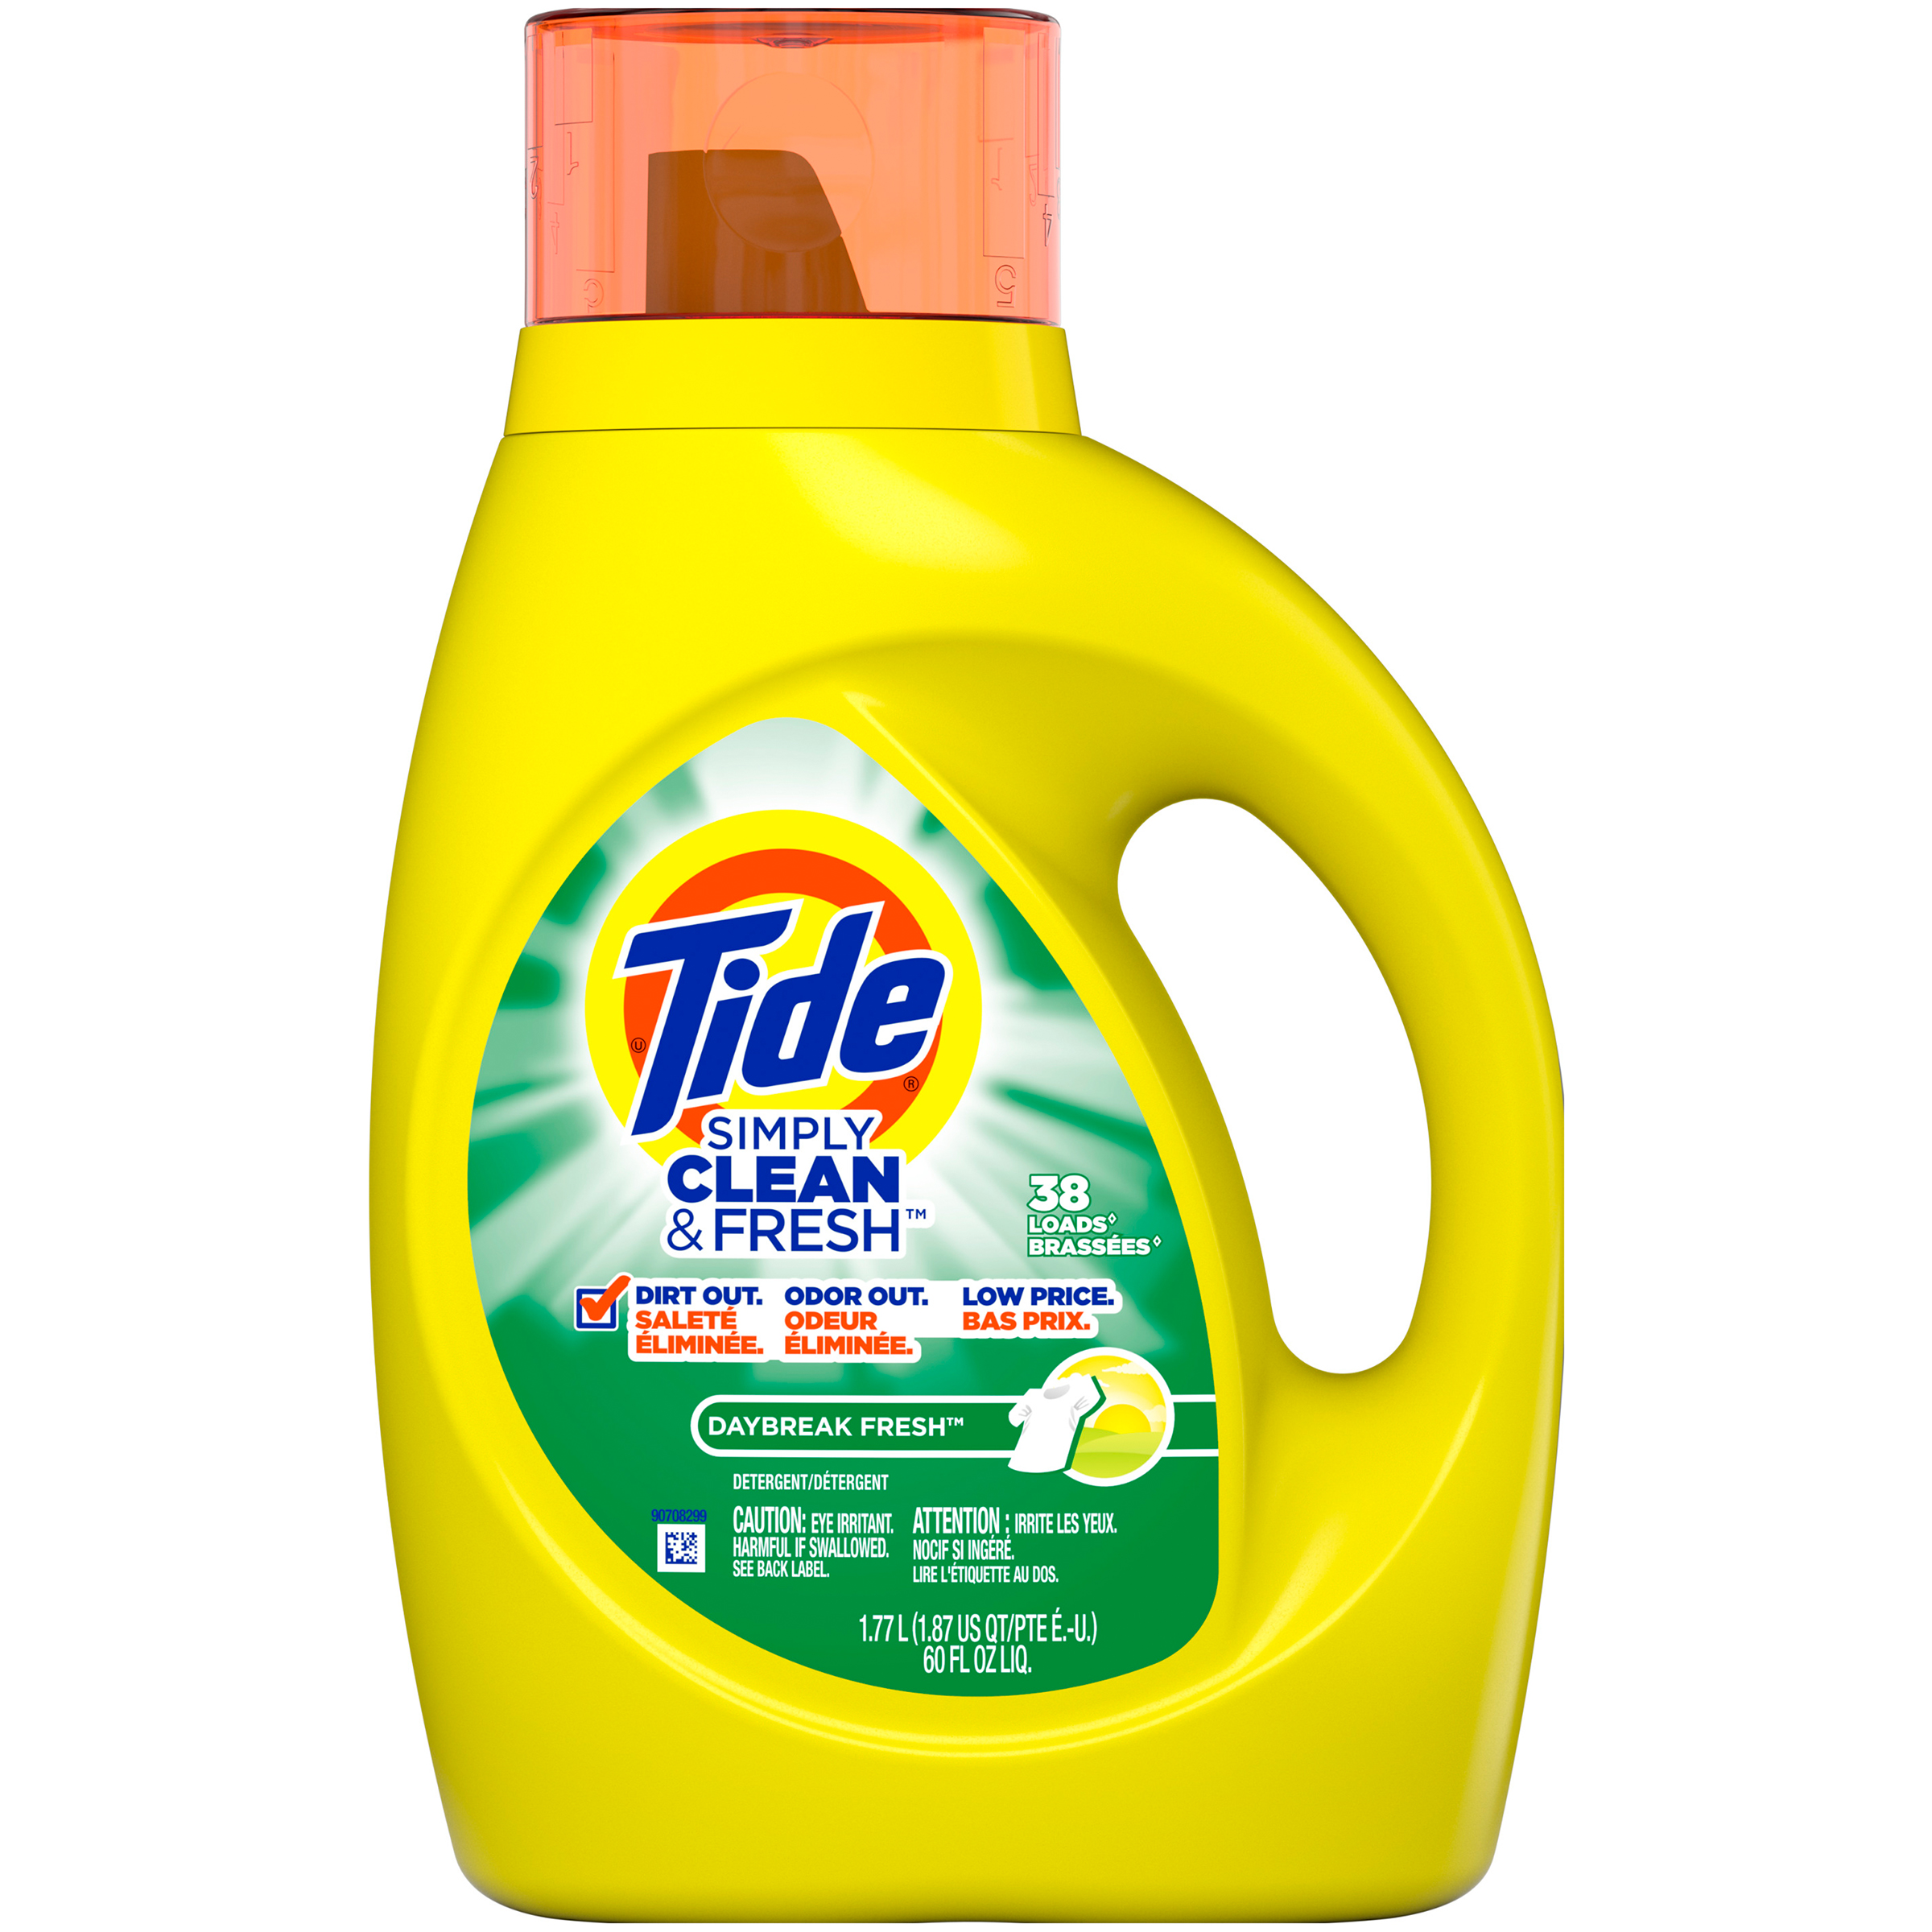 Tide Simply Clean & Fresh HE Liquid Laundry Detergent 